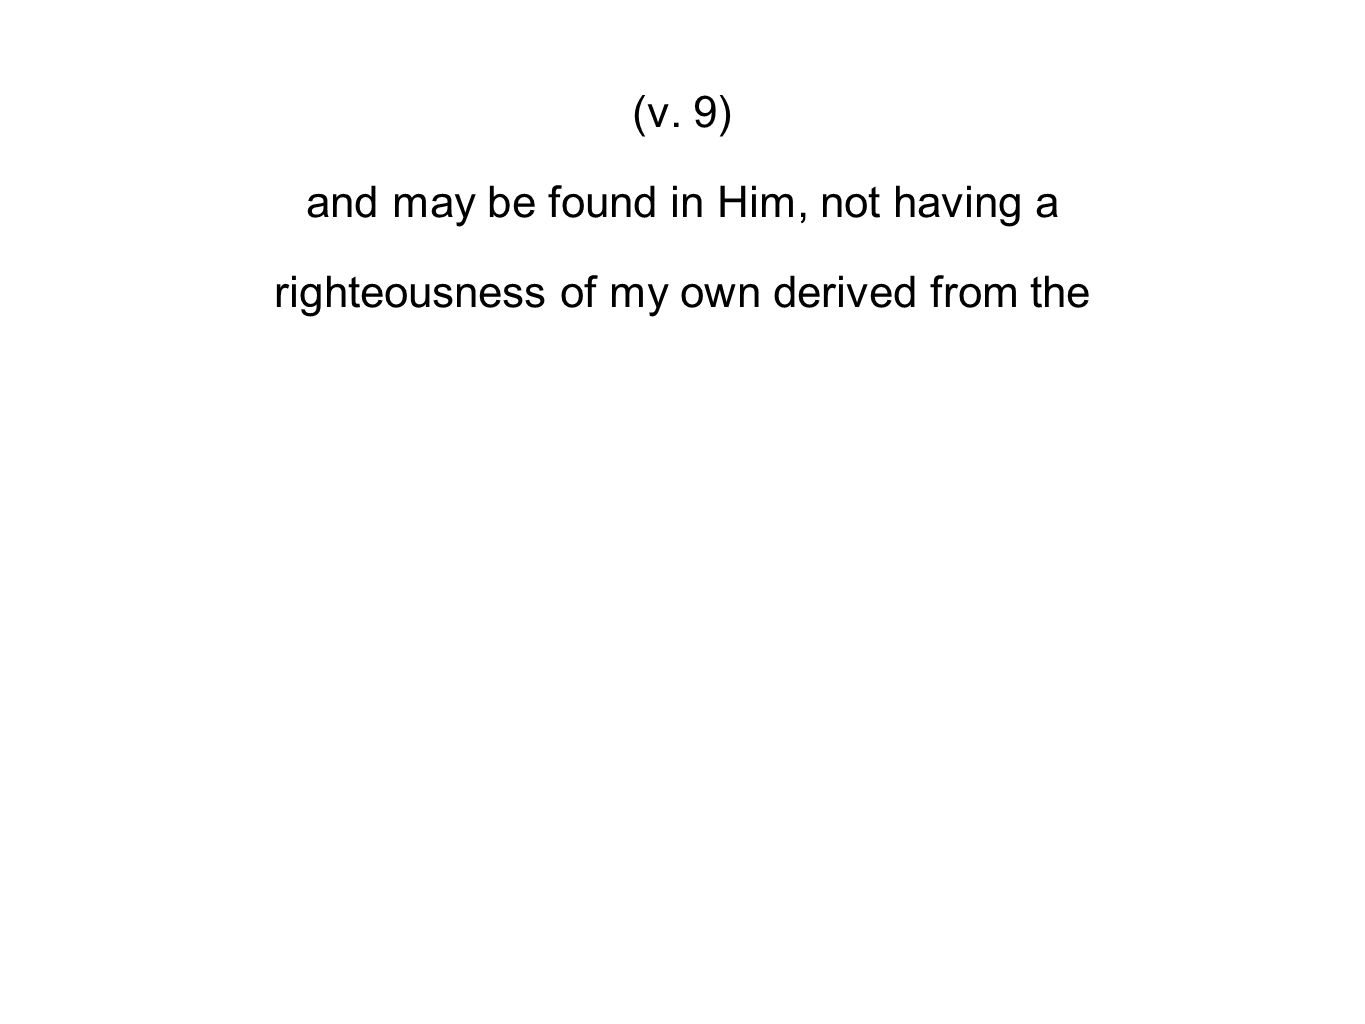 (v. 9) and may be found in Him, not having a righteousness of my own derived from the